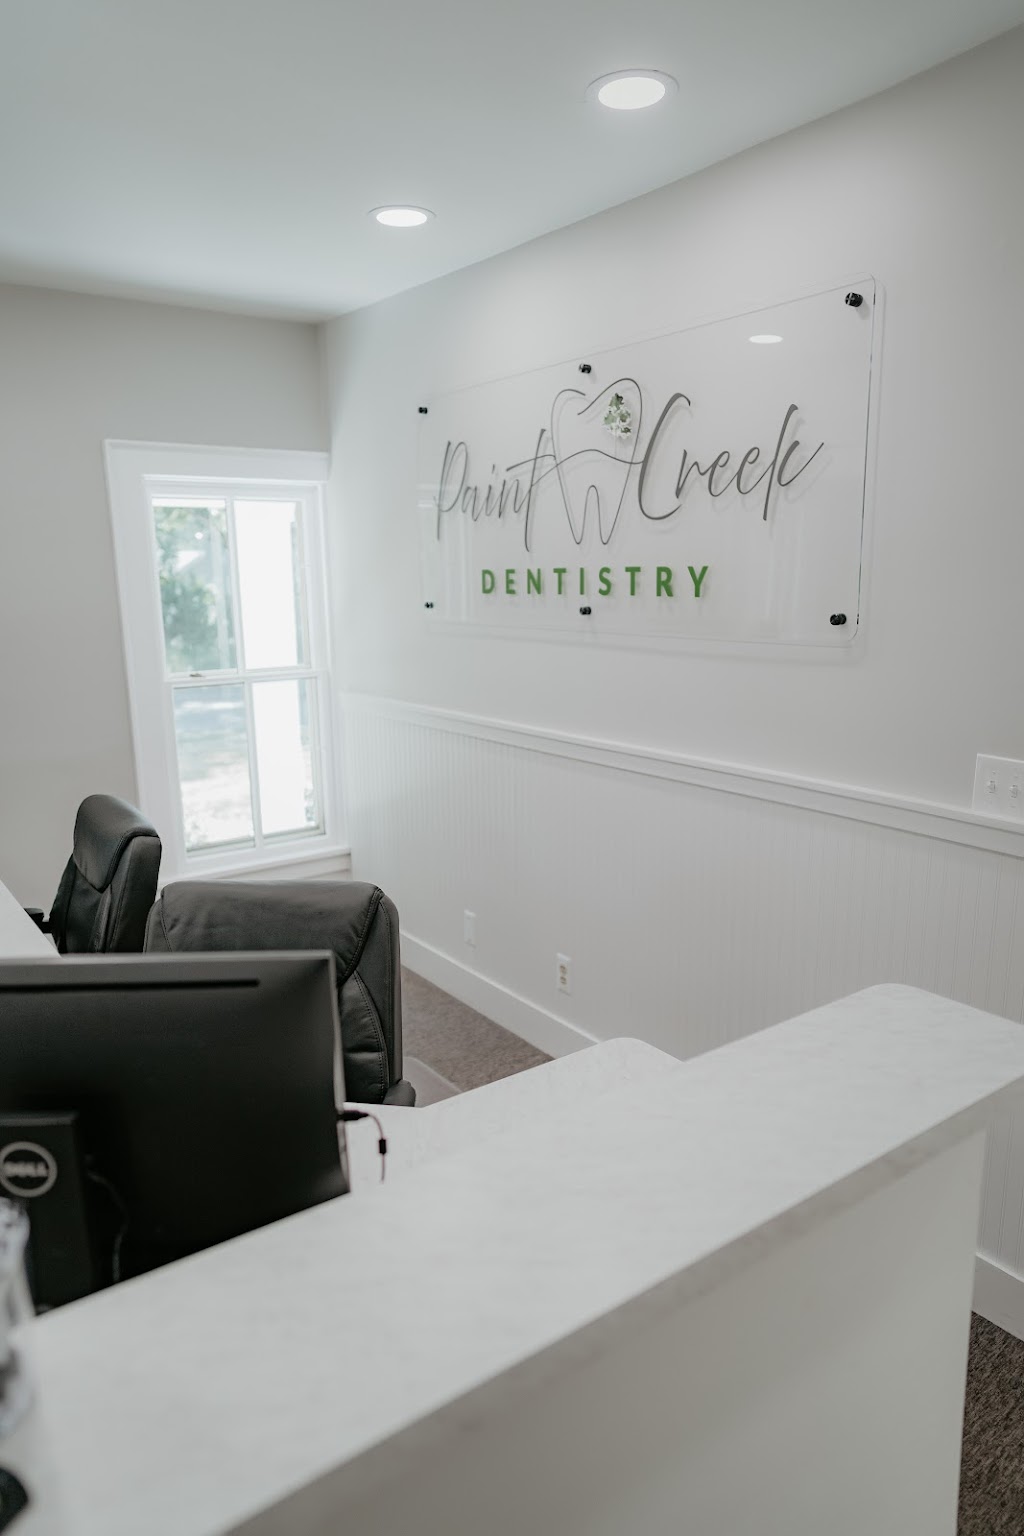 Paint Creek Family Dentistry | 4450 Collins Rd, Rochester, MI 48306, USA | Phone: (248) 652-3663